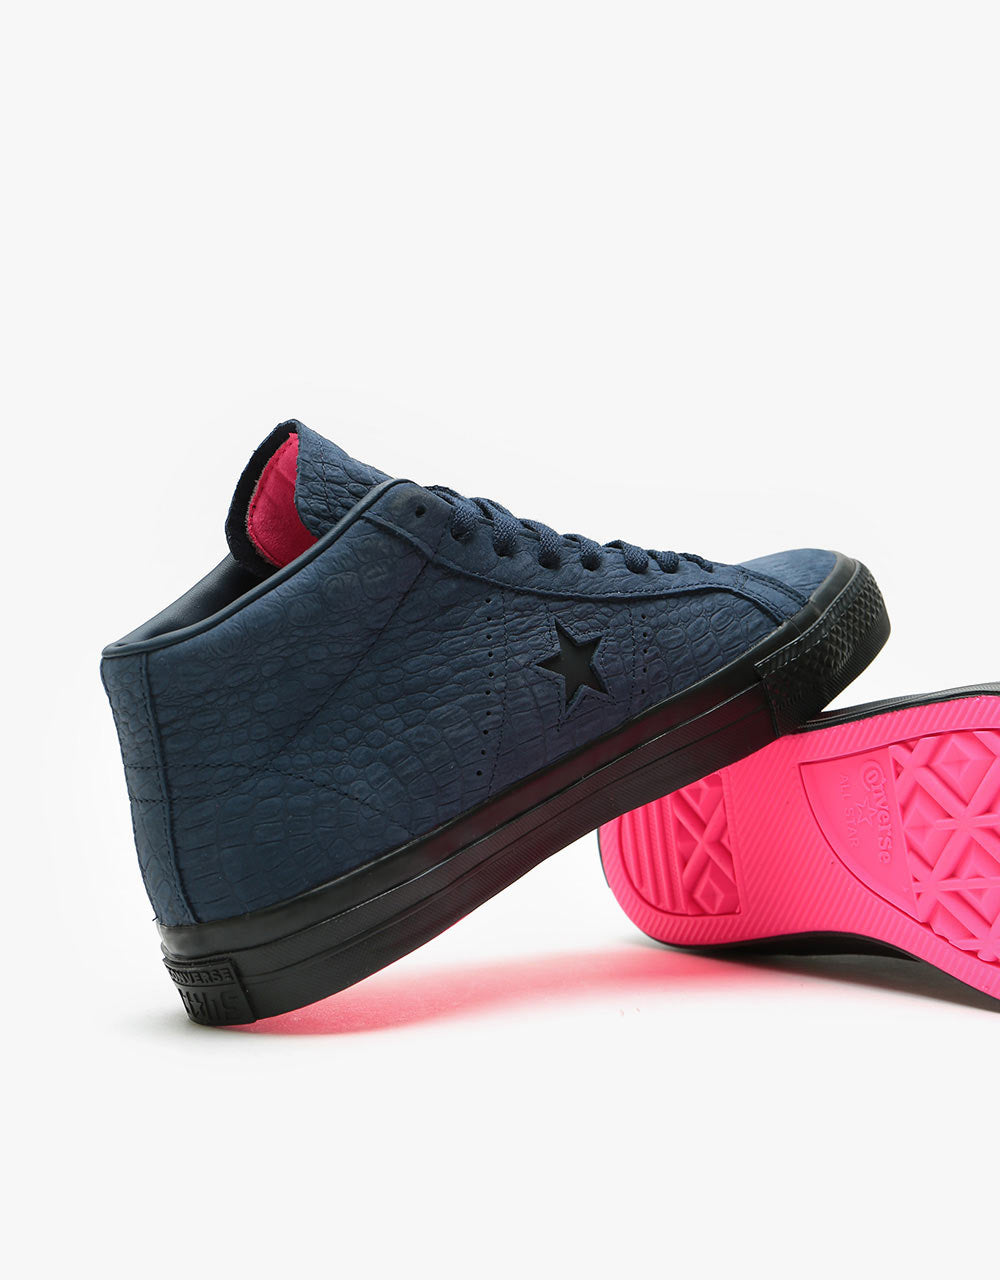 Converse One Star Pro Mid Skate Shoes - Obsidian/Hyper Pink/Black